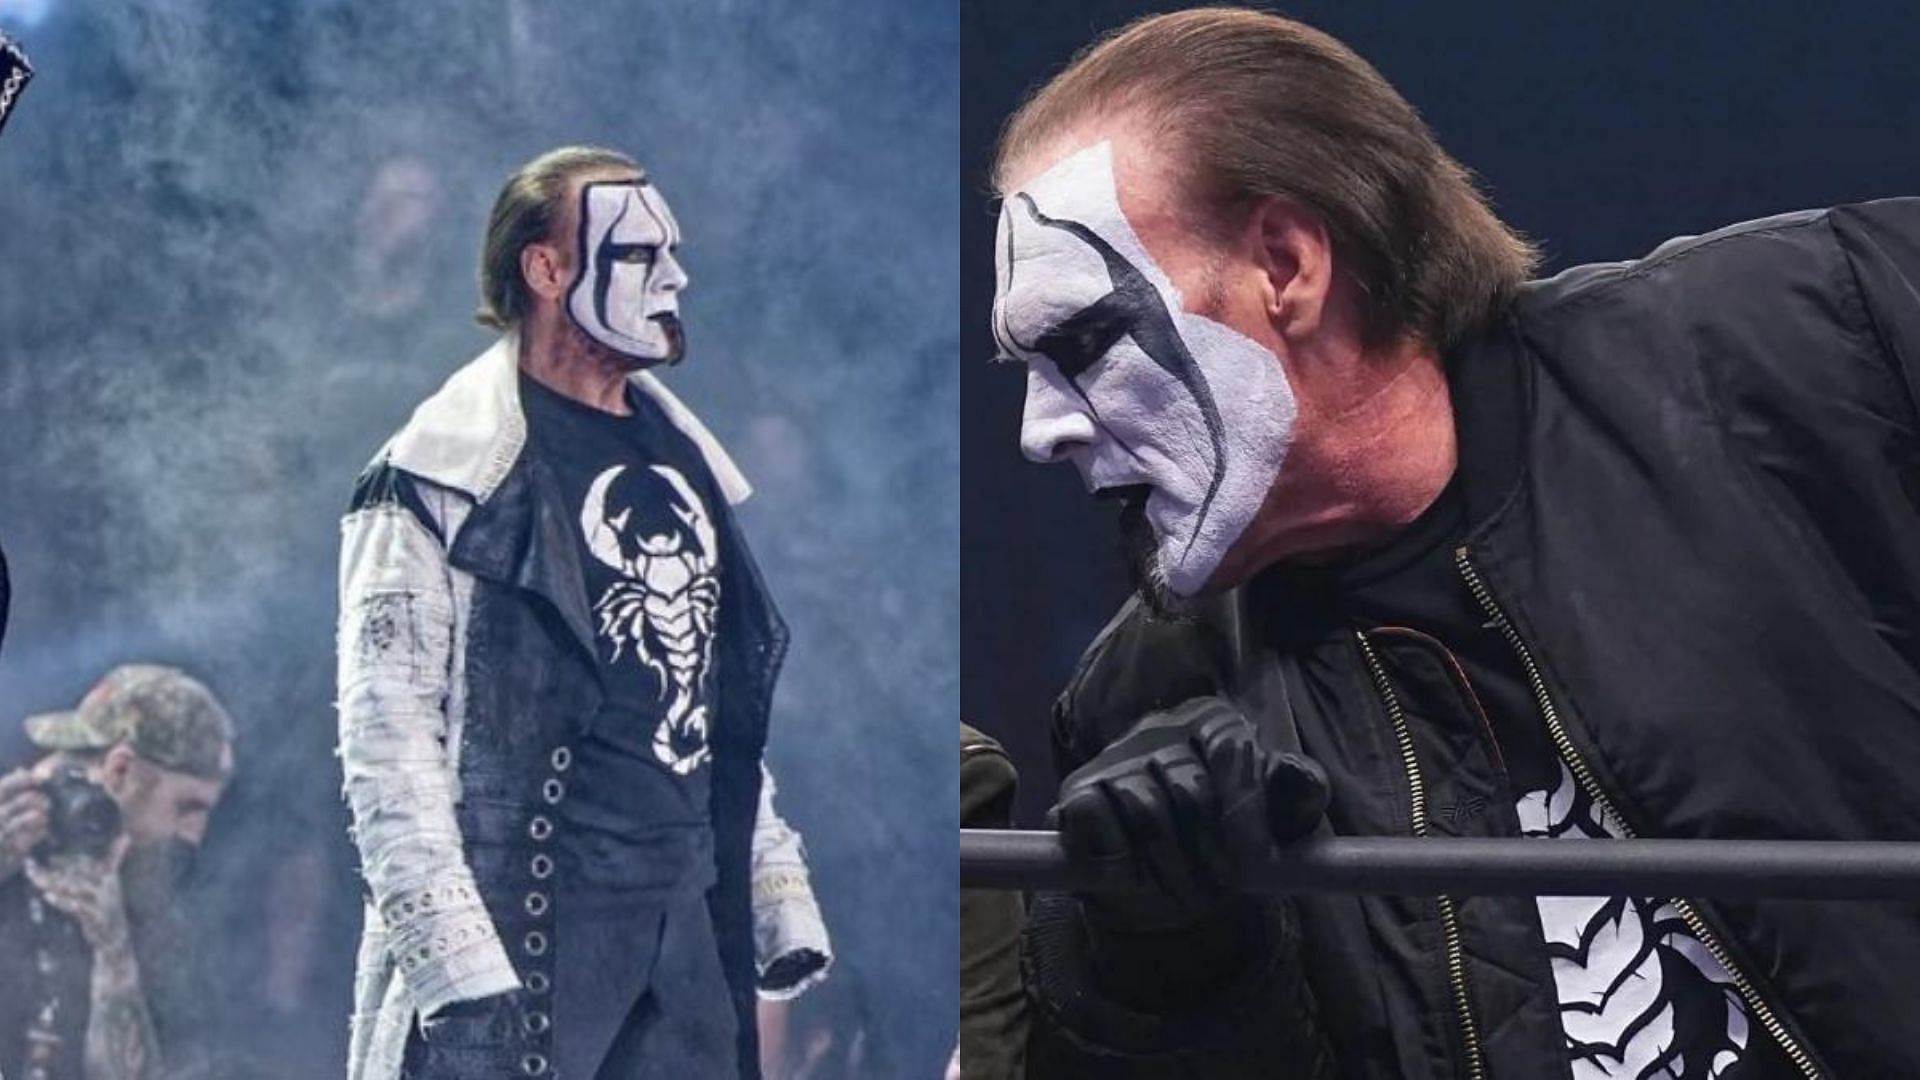 Sting was victorious in his final match in LA